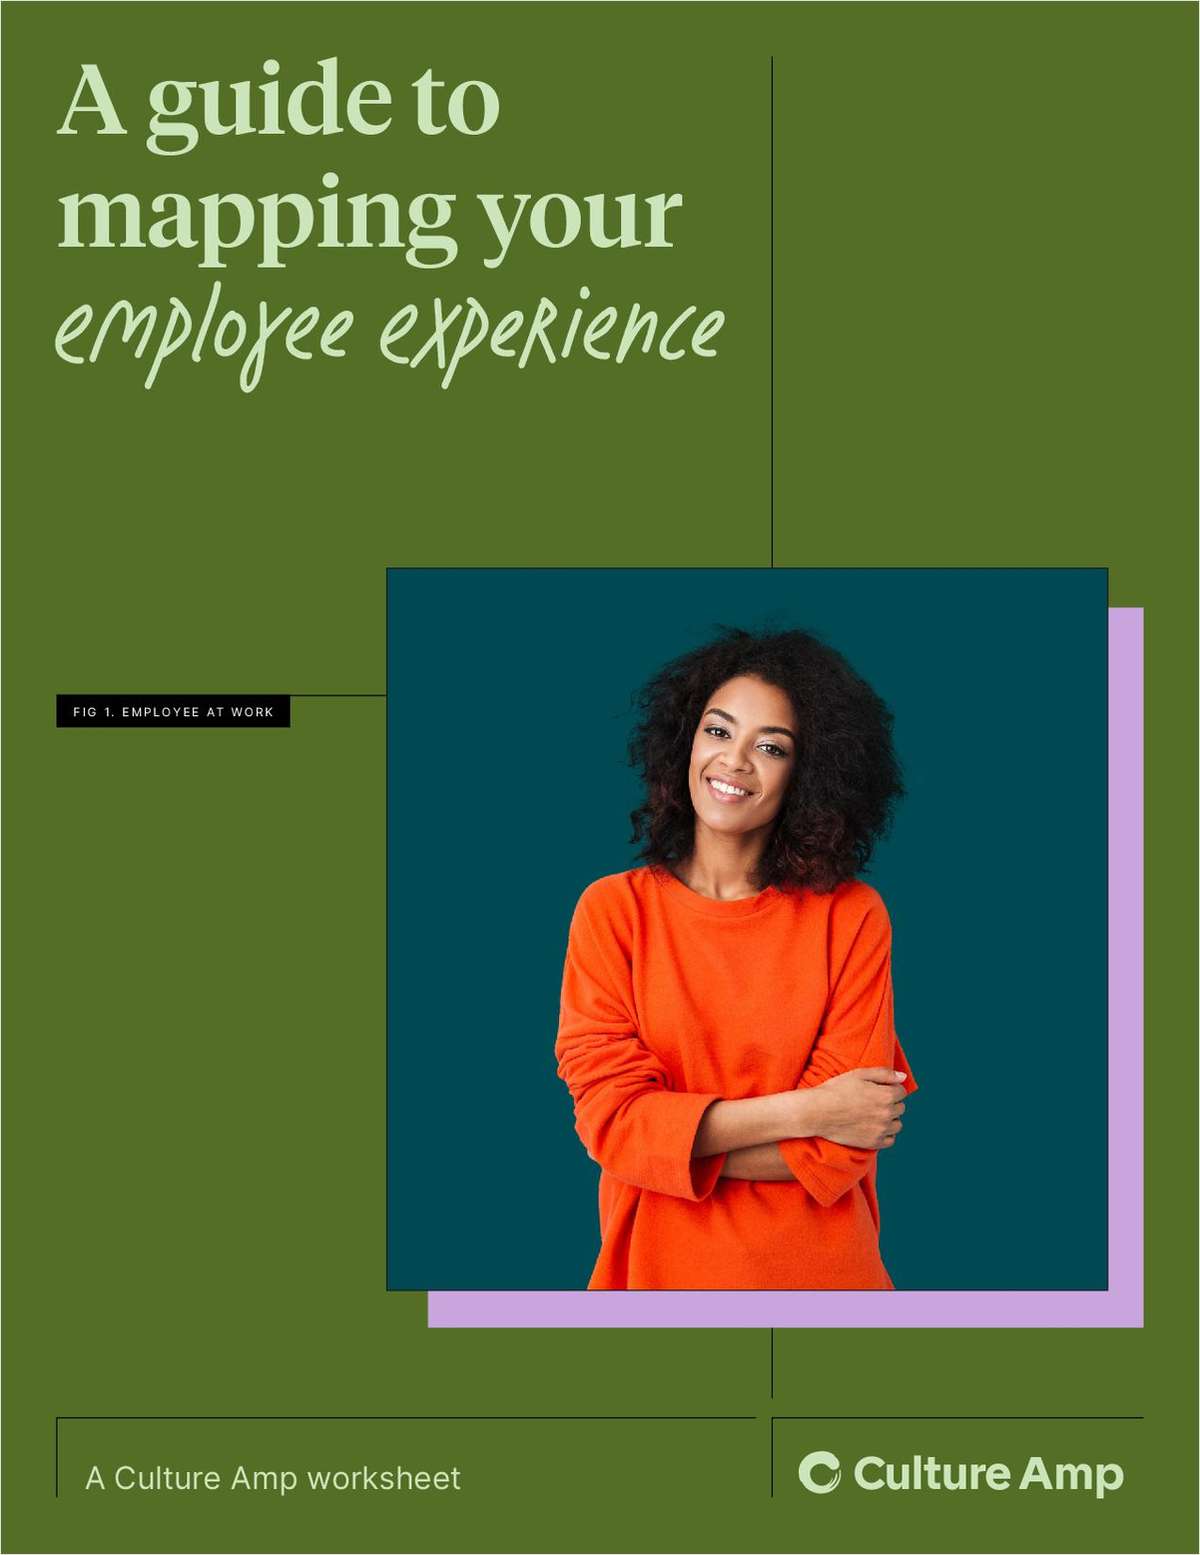 A guide to mapping your employee experience